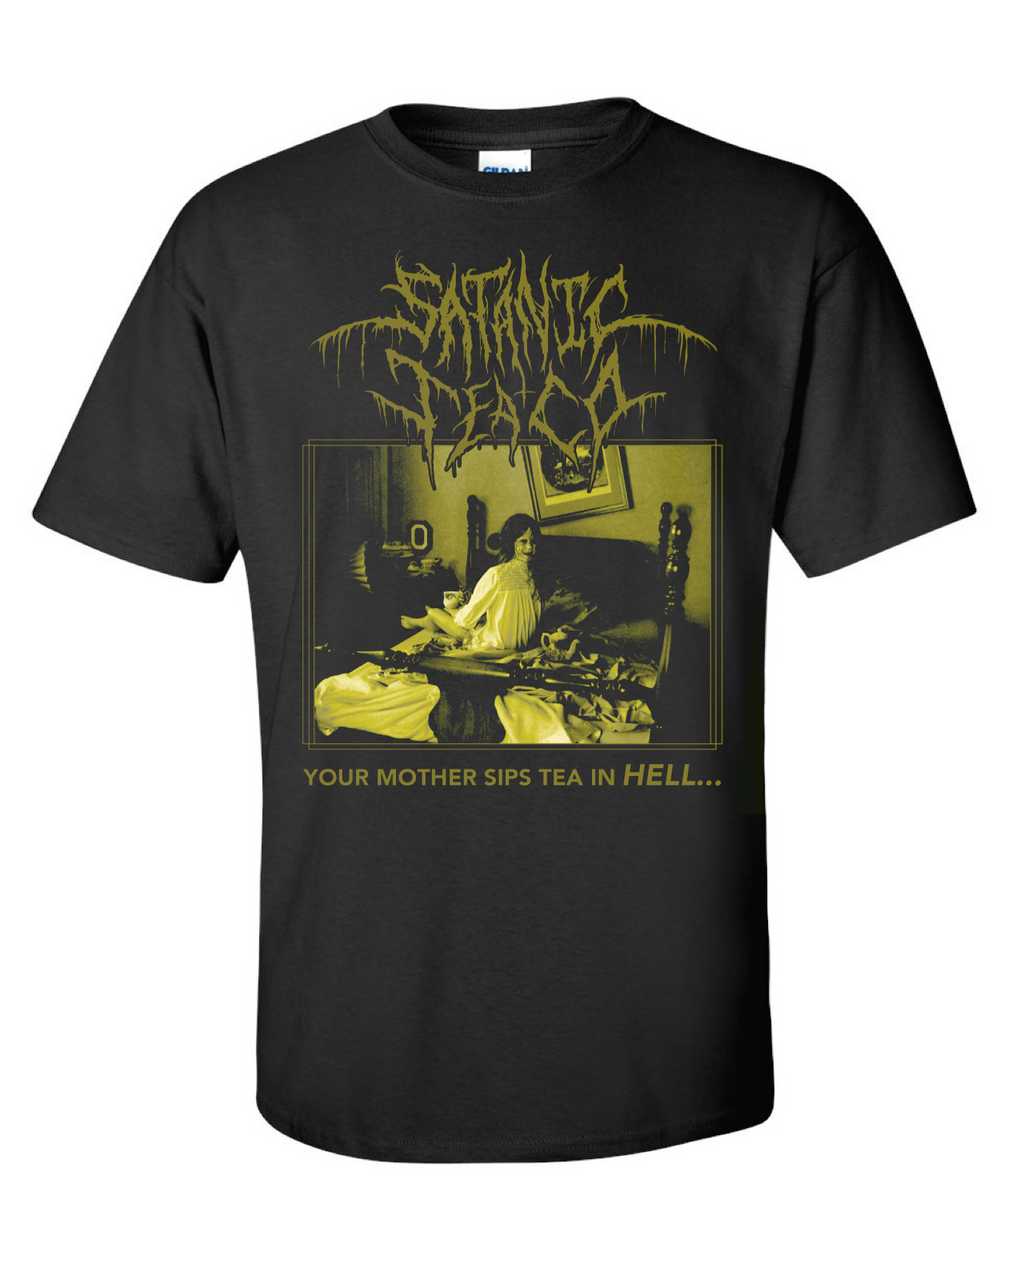 YOUR MOTHER SIPS TEA IN HELL T SHIRT